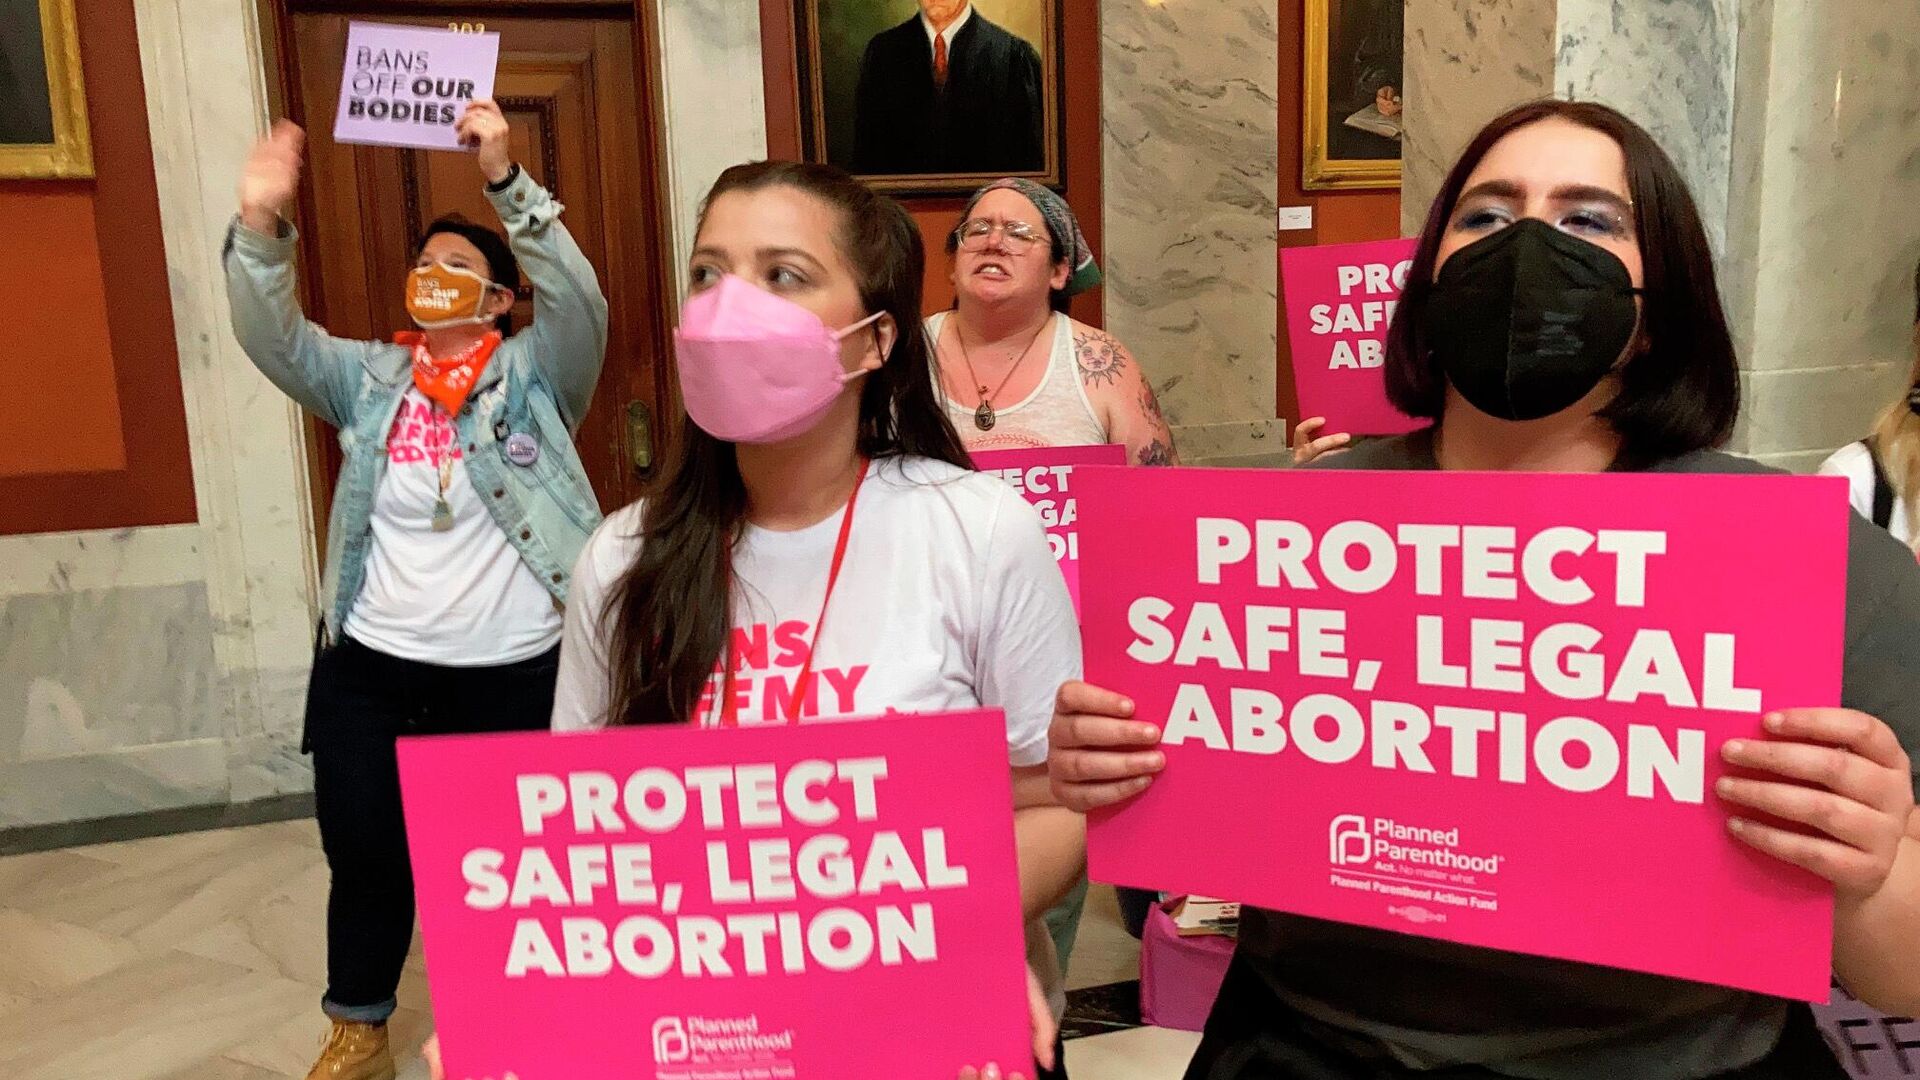 Abortion-rights supporters chant their objections at the Kentucky Capitol on Wednesday, April 13, 2022, in Frankfort, Ky., as Kentucky lawmakers debate overriding the governor’s veto of an abortion measure. - Sputnik International, 1920, 14.04.2022